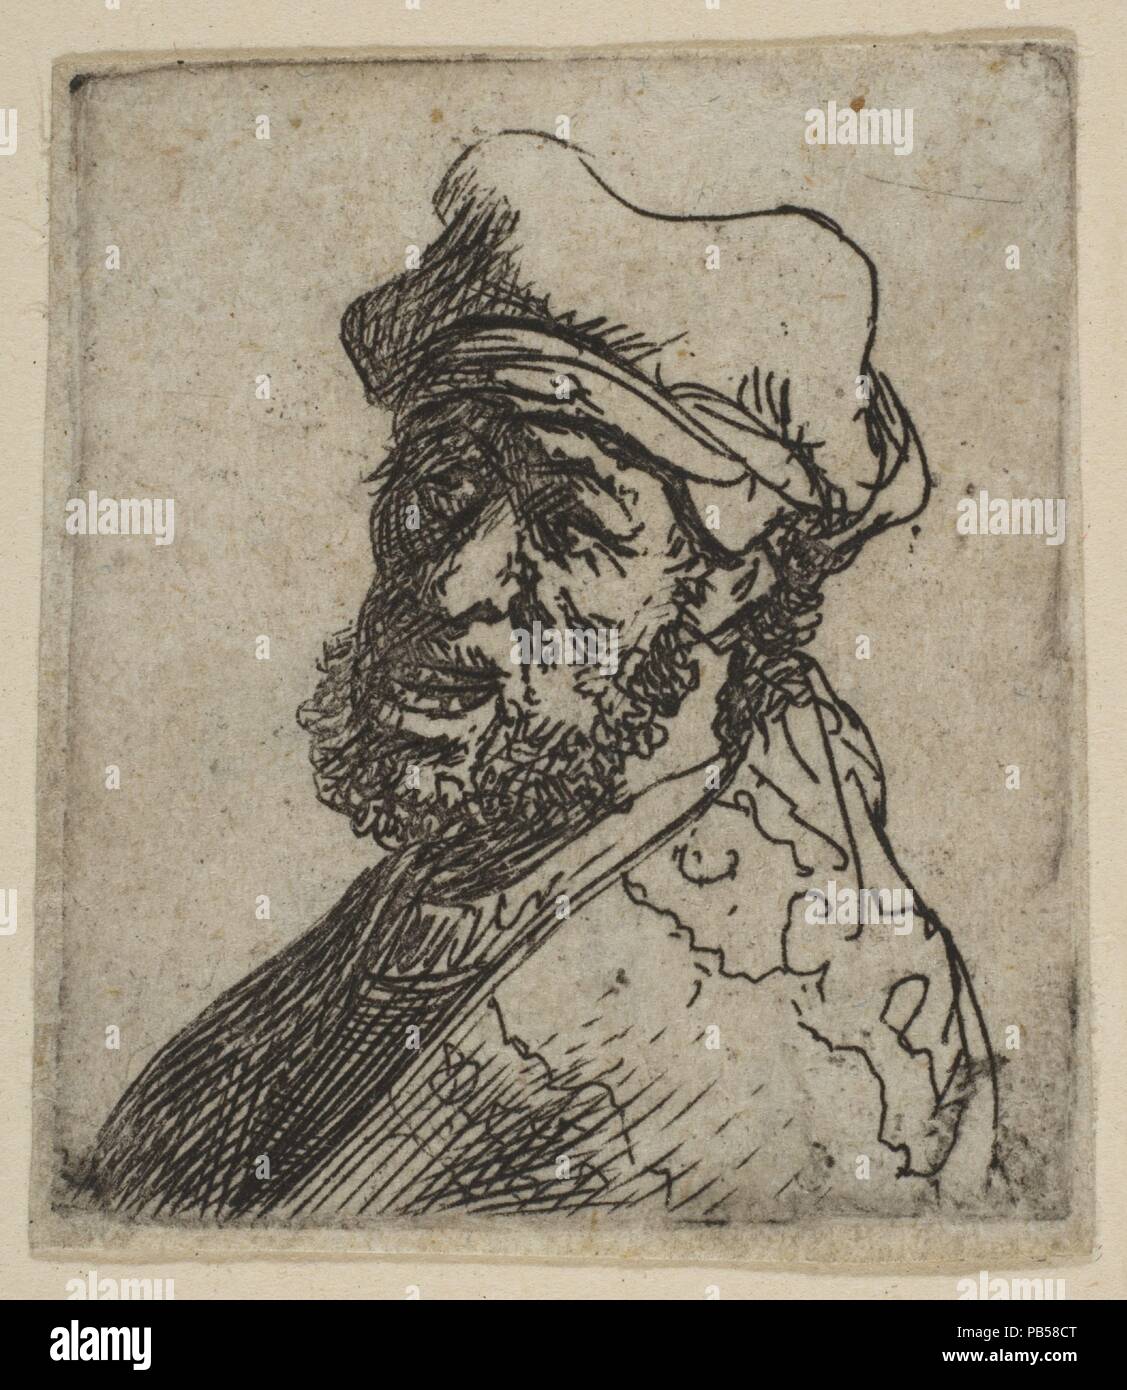 Man Crying Out, Three-Quarters Left: Bust. Artist: Rembrandt (Rembrandt van Rijn) (Dutch, Leiden 1606-1669 Amsterdam). Dimensions: Sheet: 1 5/8 × 1 7/16 in. (4.1 × 3.6 cm)  Plate: 1 1/2 × 1 5/16 in. (3.8 × 3.4 cm). Date: ca. 1629. Museum: Metropolitan Museum of Art, New York, USA. Stock Photo